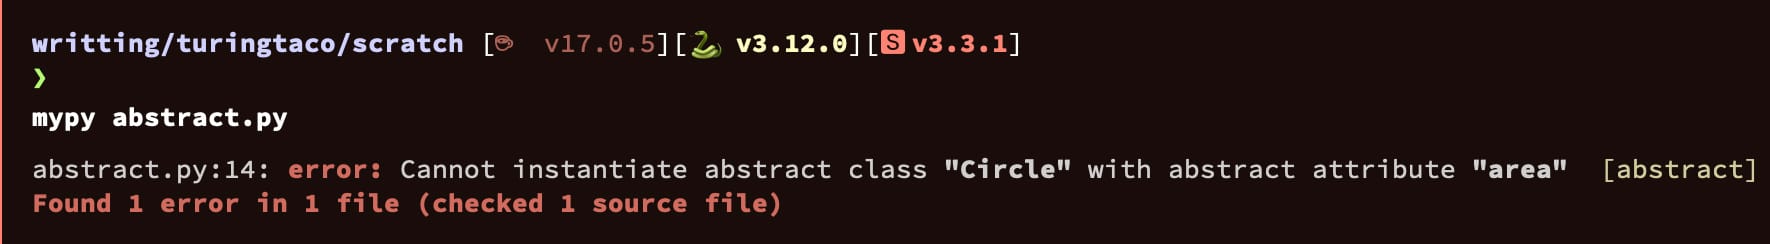 mypy reporting that an abstract class can't be instantiated.